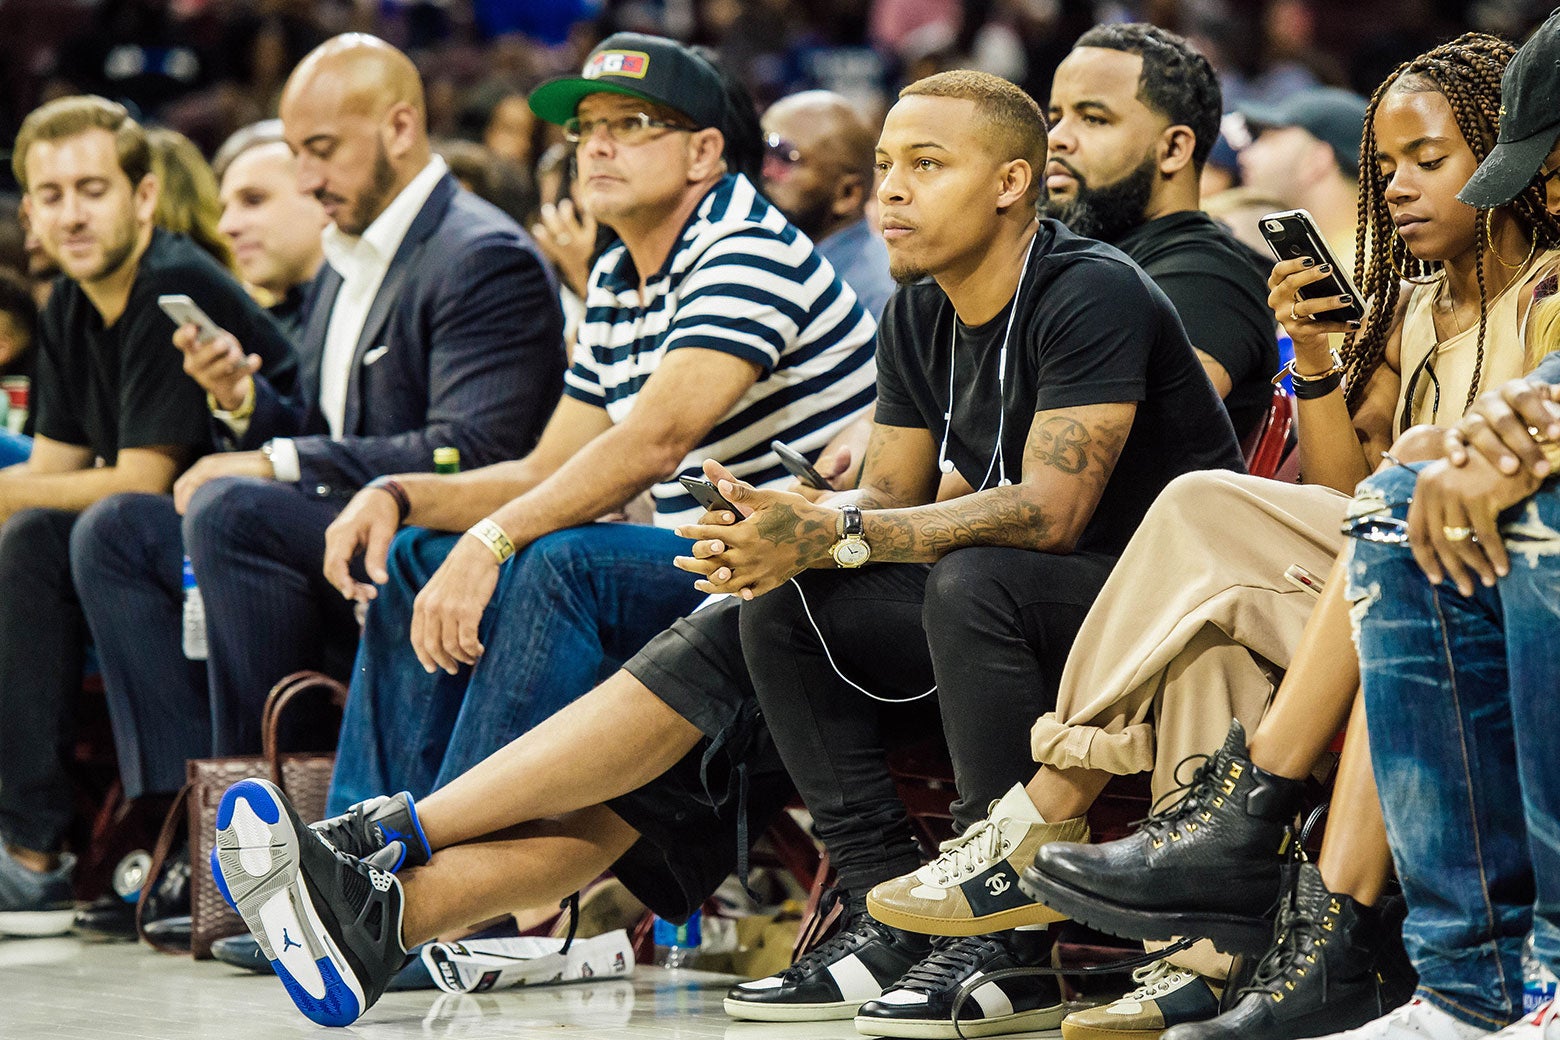 Actor / rapper Bow Wow looks on during a BIG3 game on July 16, 2017 at Wells Fargo Center in Philadelphia, PA. Also pictured is Ahmed Al-Rumaihi.